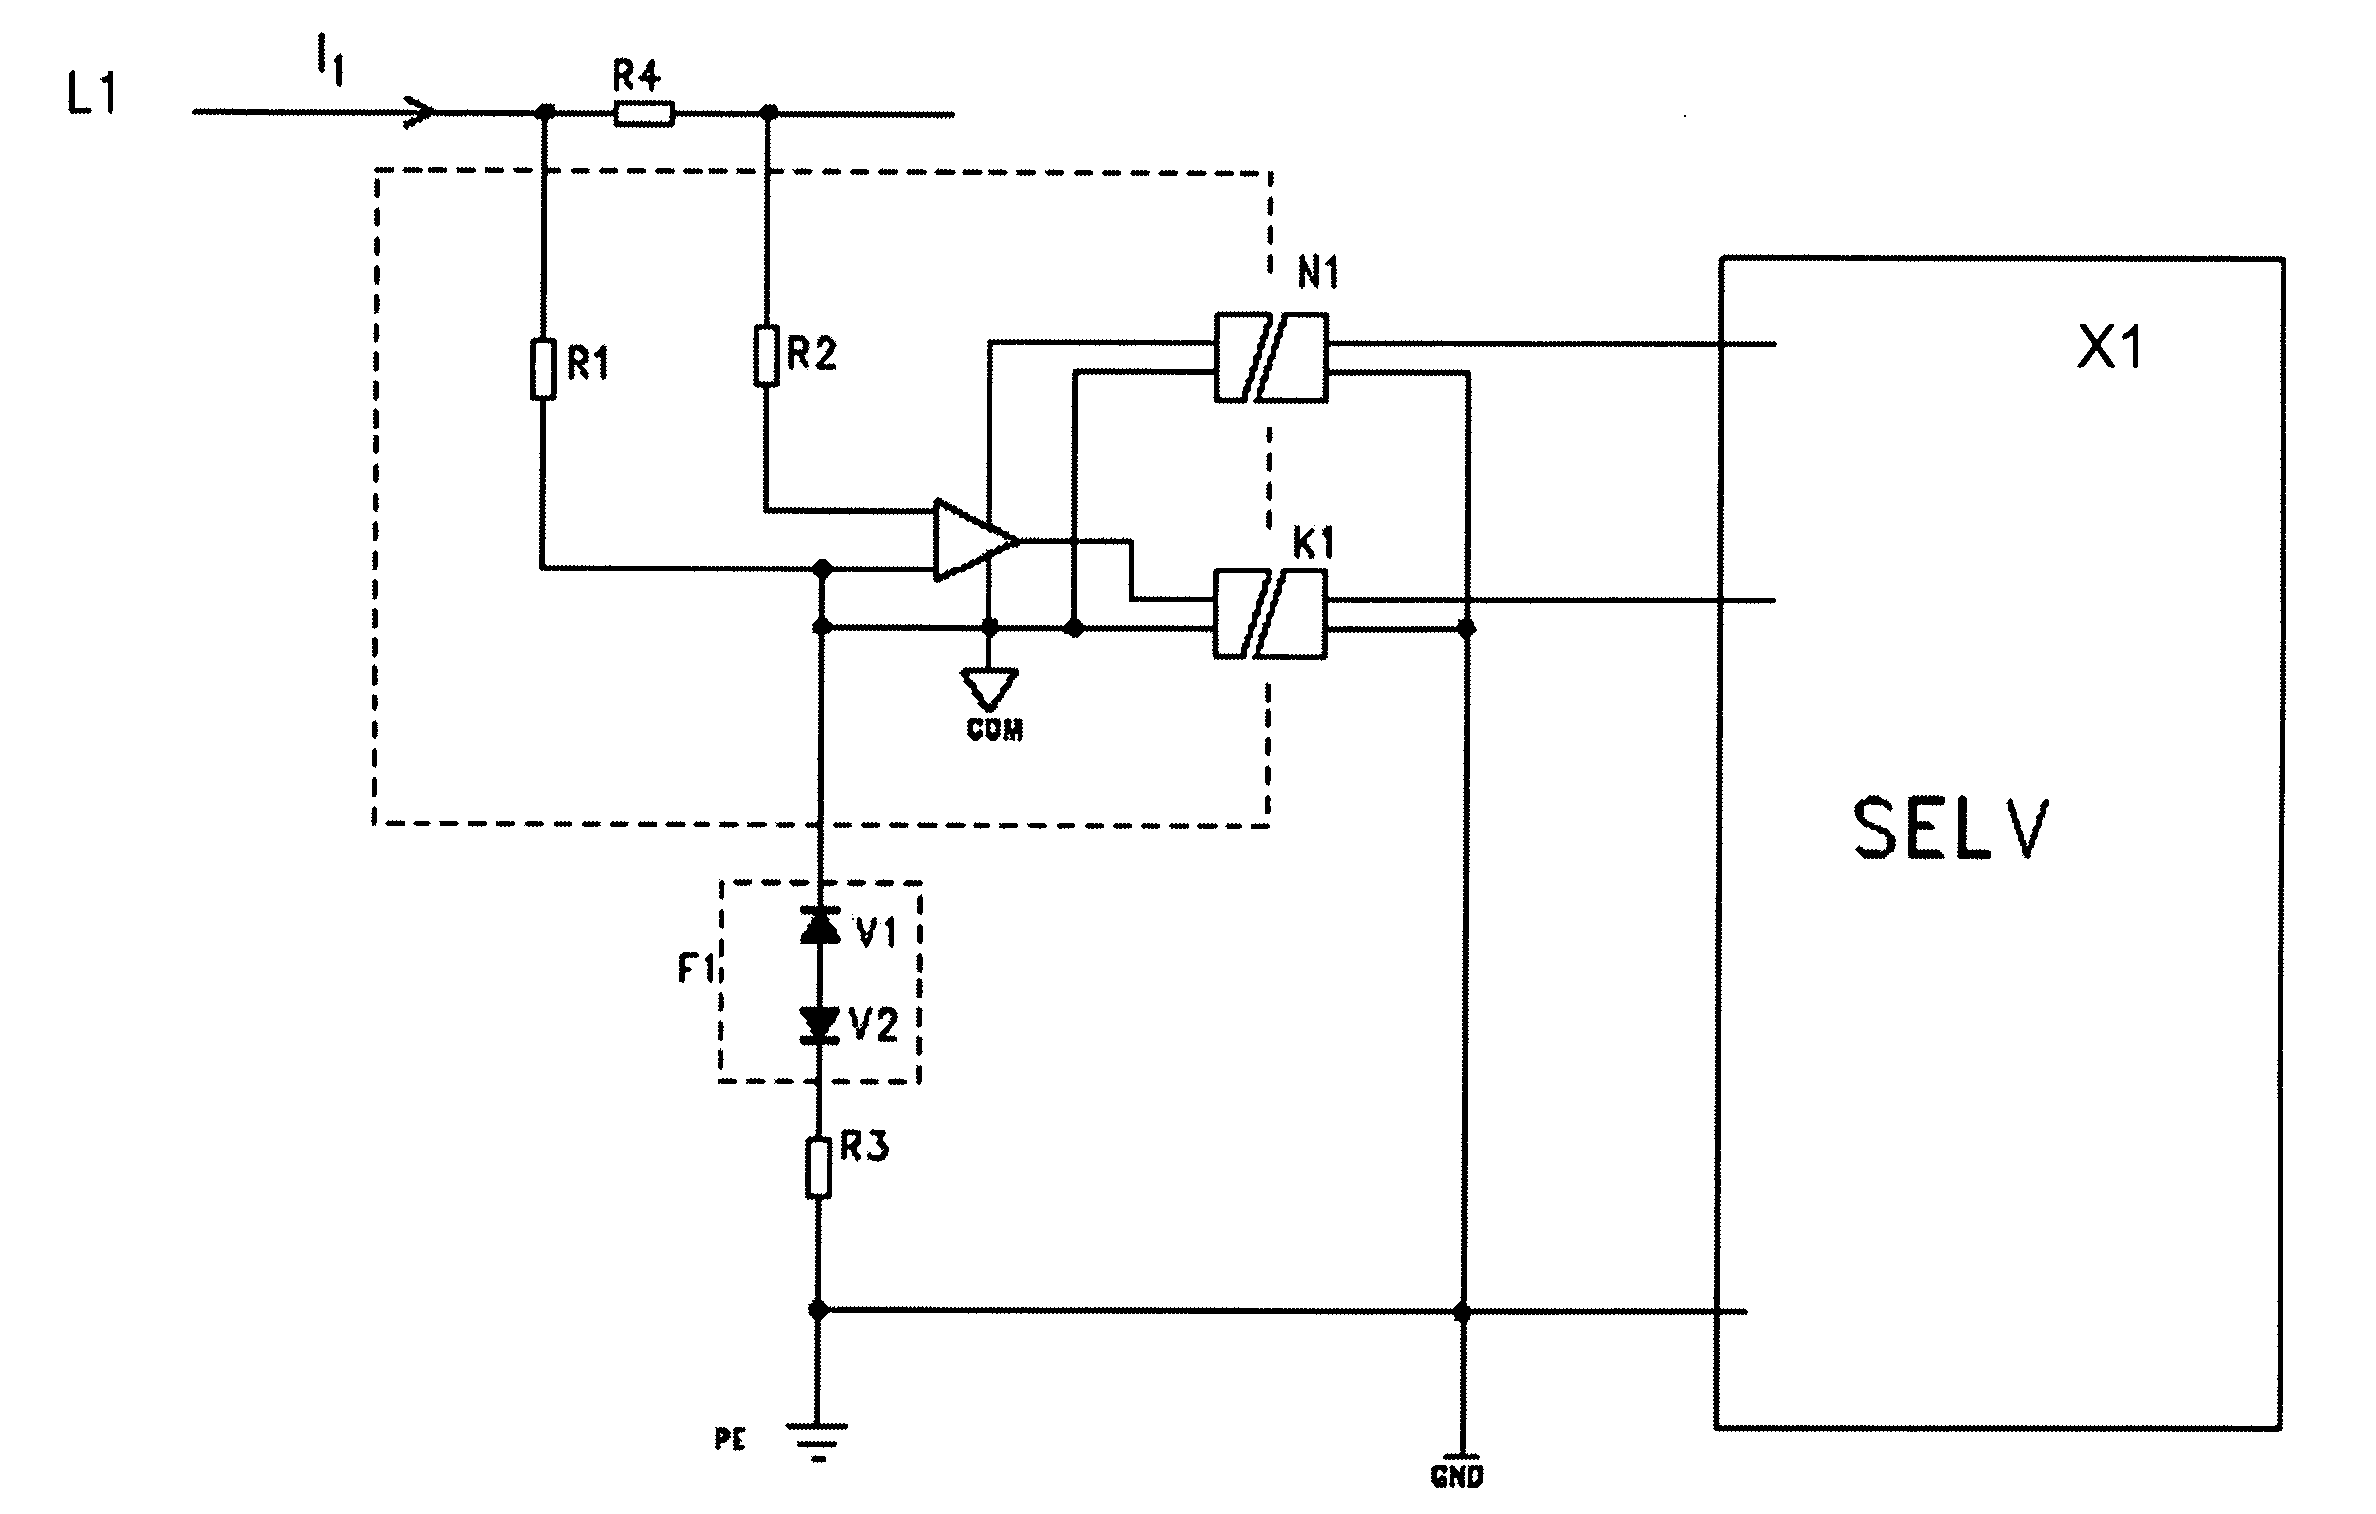 Earthing and overvoltage protection arrangement